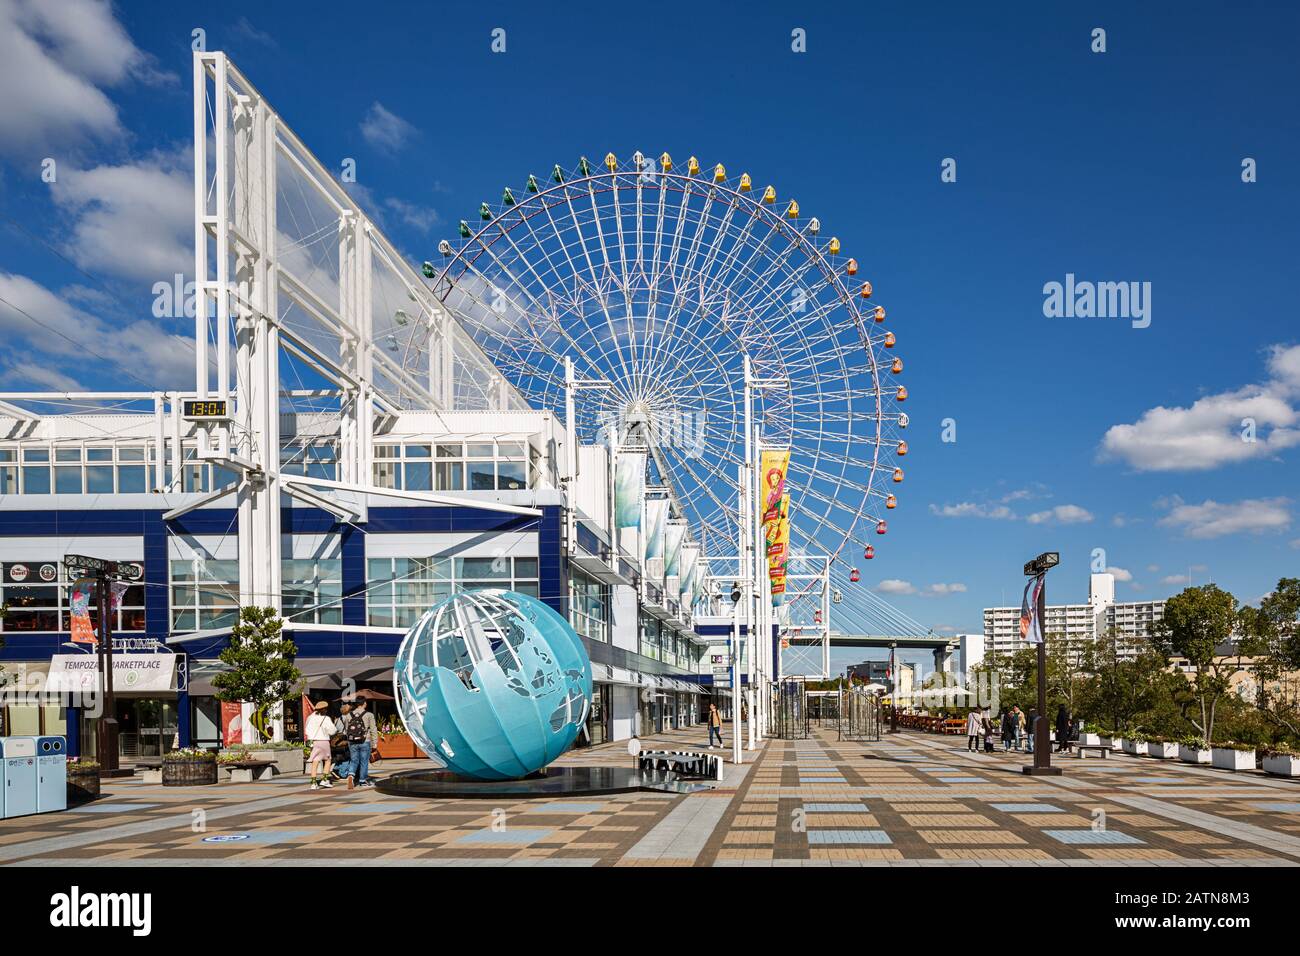 Redhorse Osaka Wheel is a 123-metre tall giant Ferris wheel at Expocity in Suita, Osaka Prefecture, Japan. Stock Photo